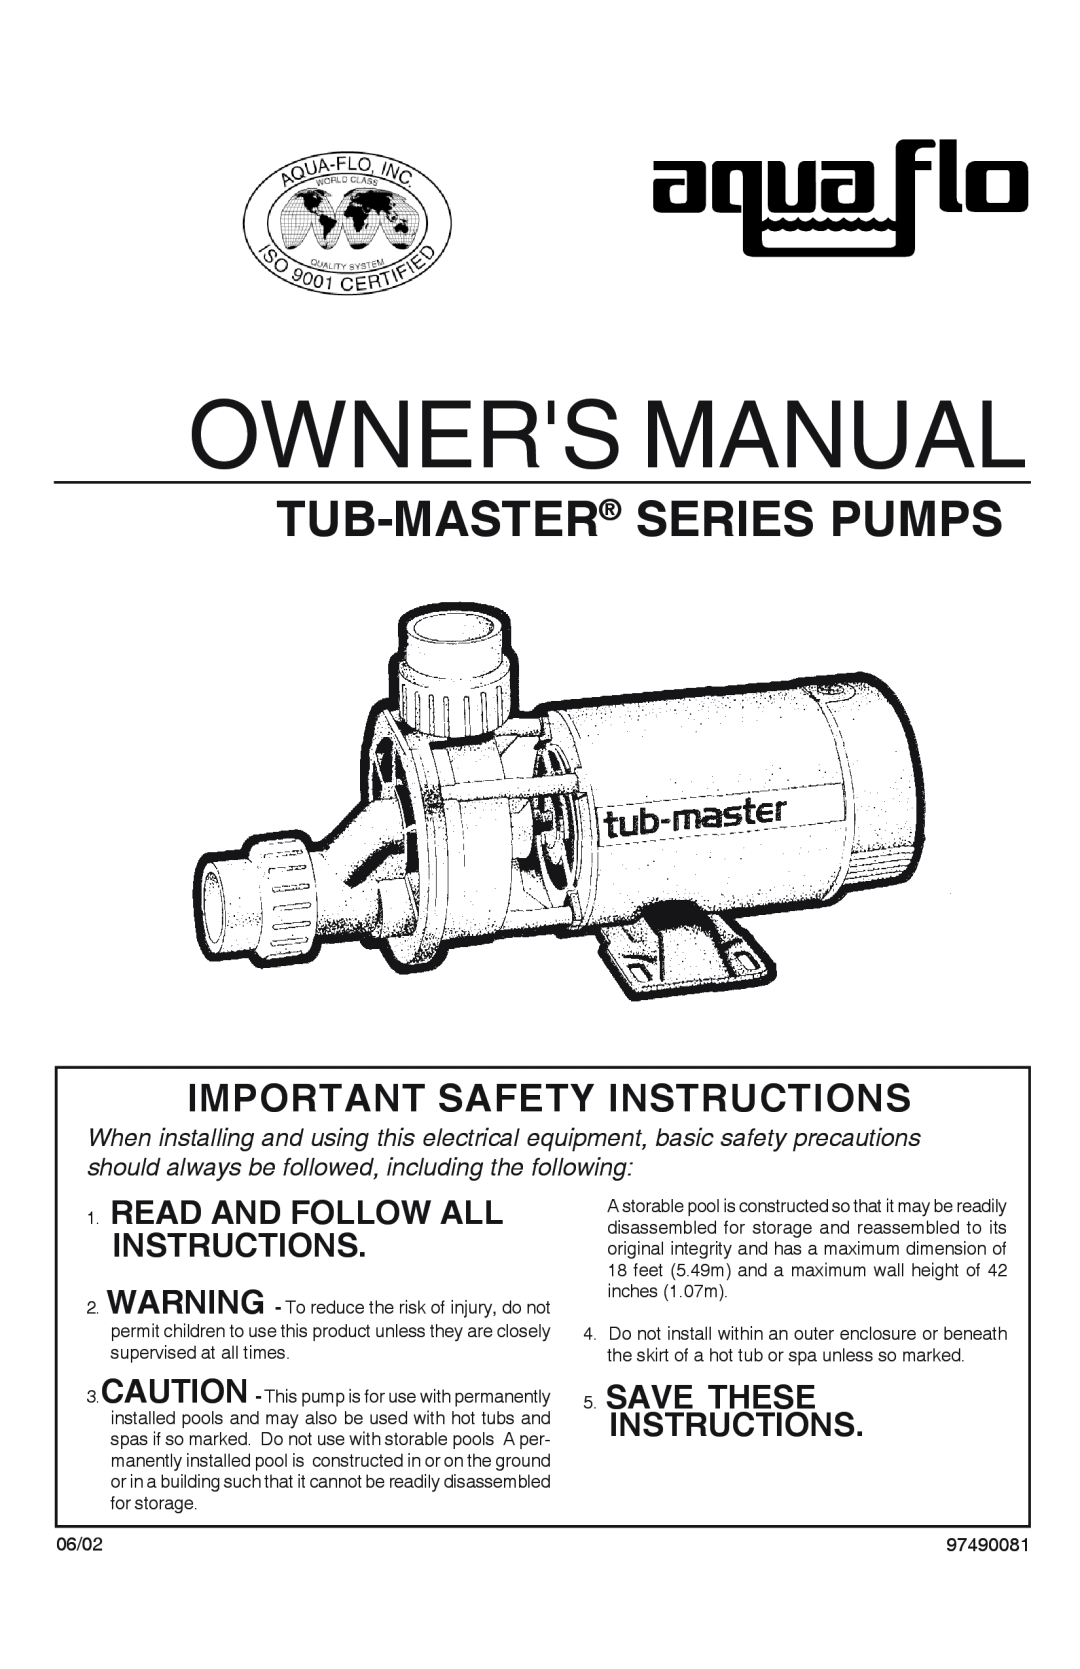 Aqua Flo owner manual Read And Follow All Instructions, Save These Instructions, Tub-Master Series Pumps 